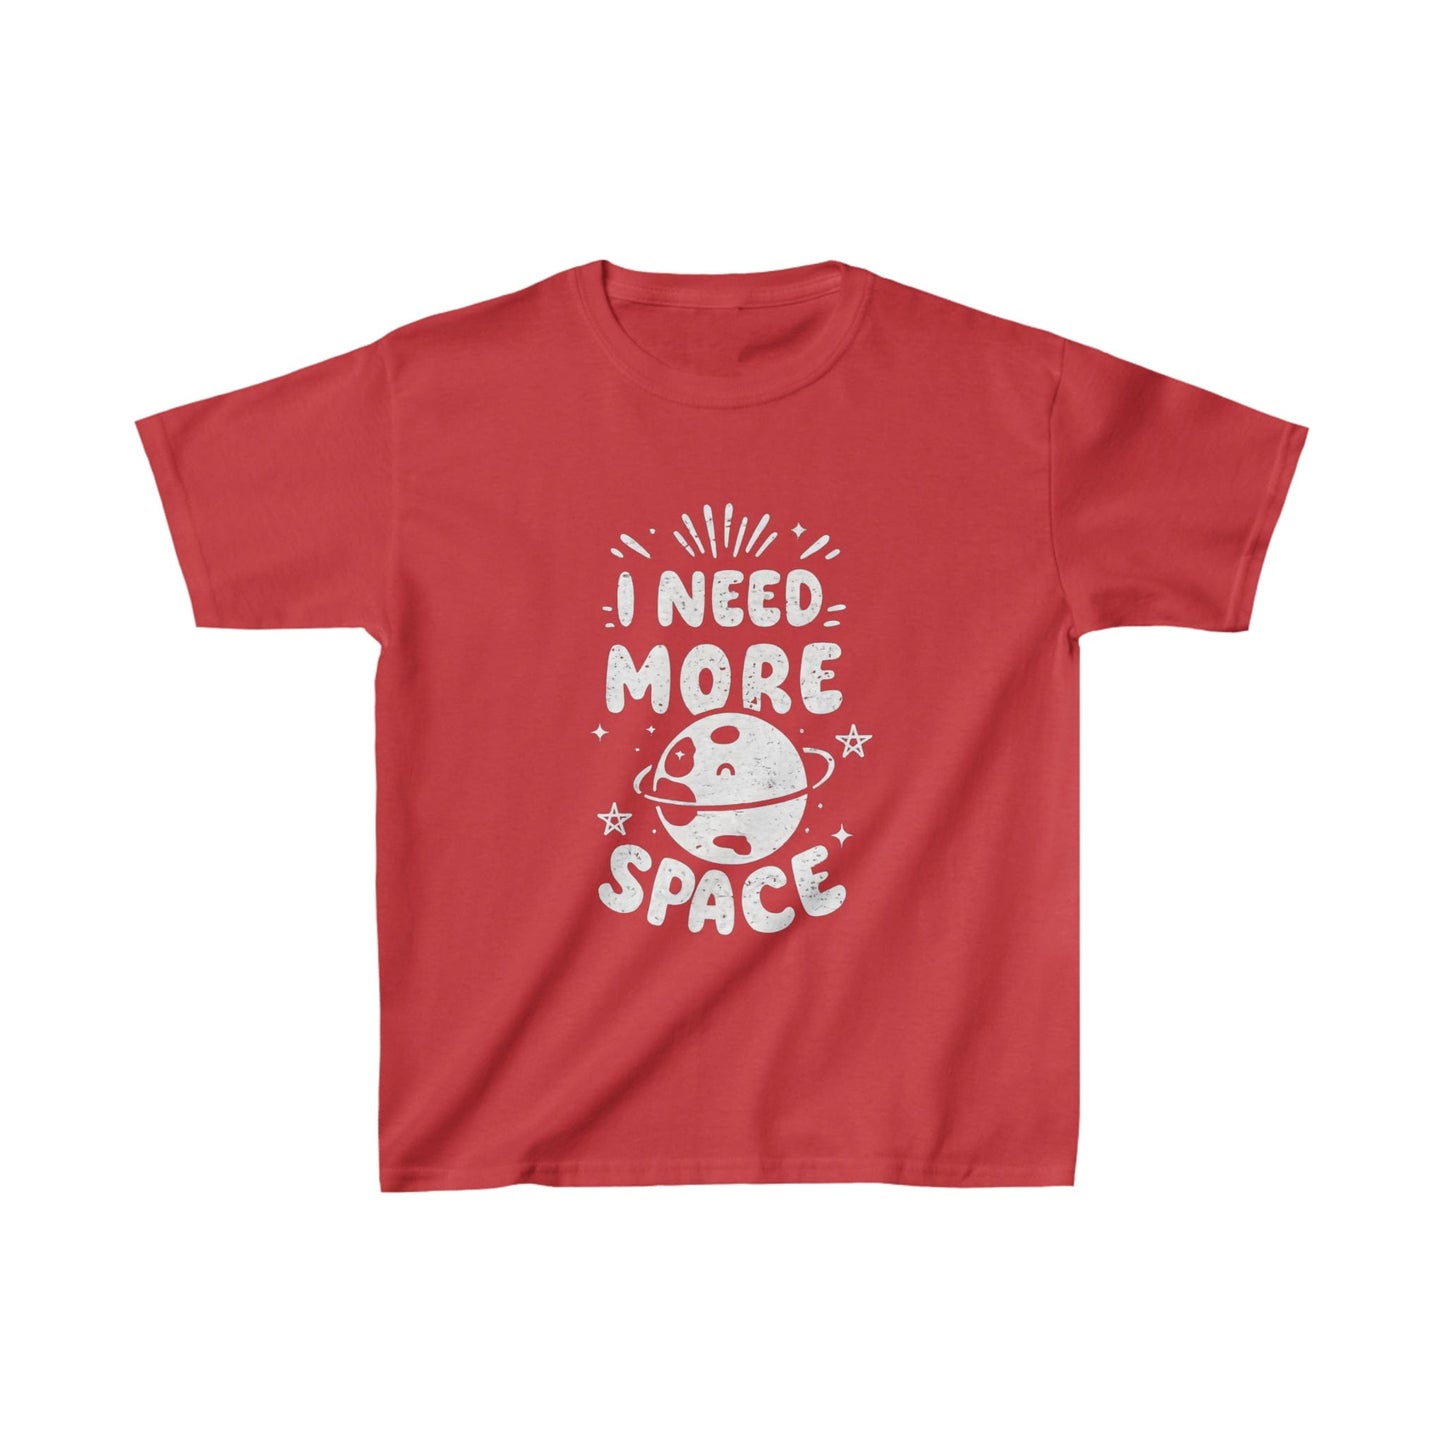 Kids clothes XS / Red Youth I Need More Space T-Shirt